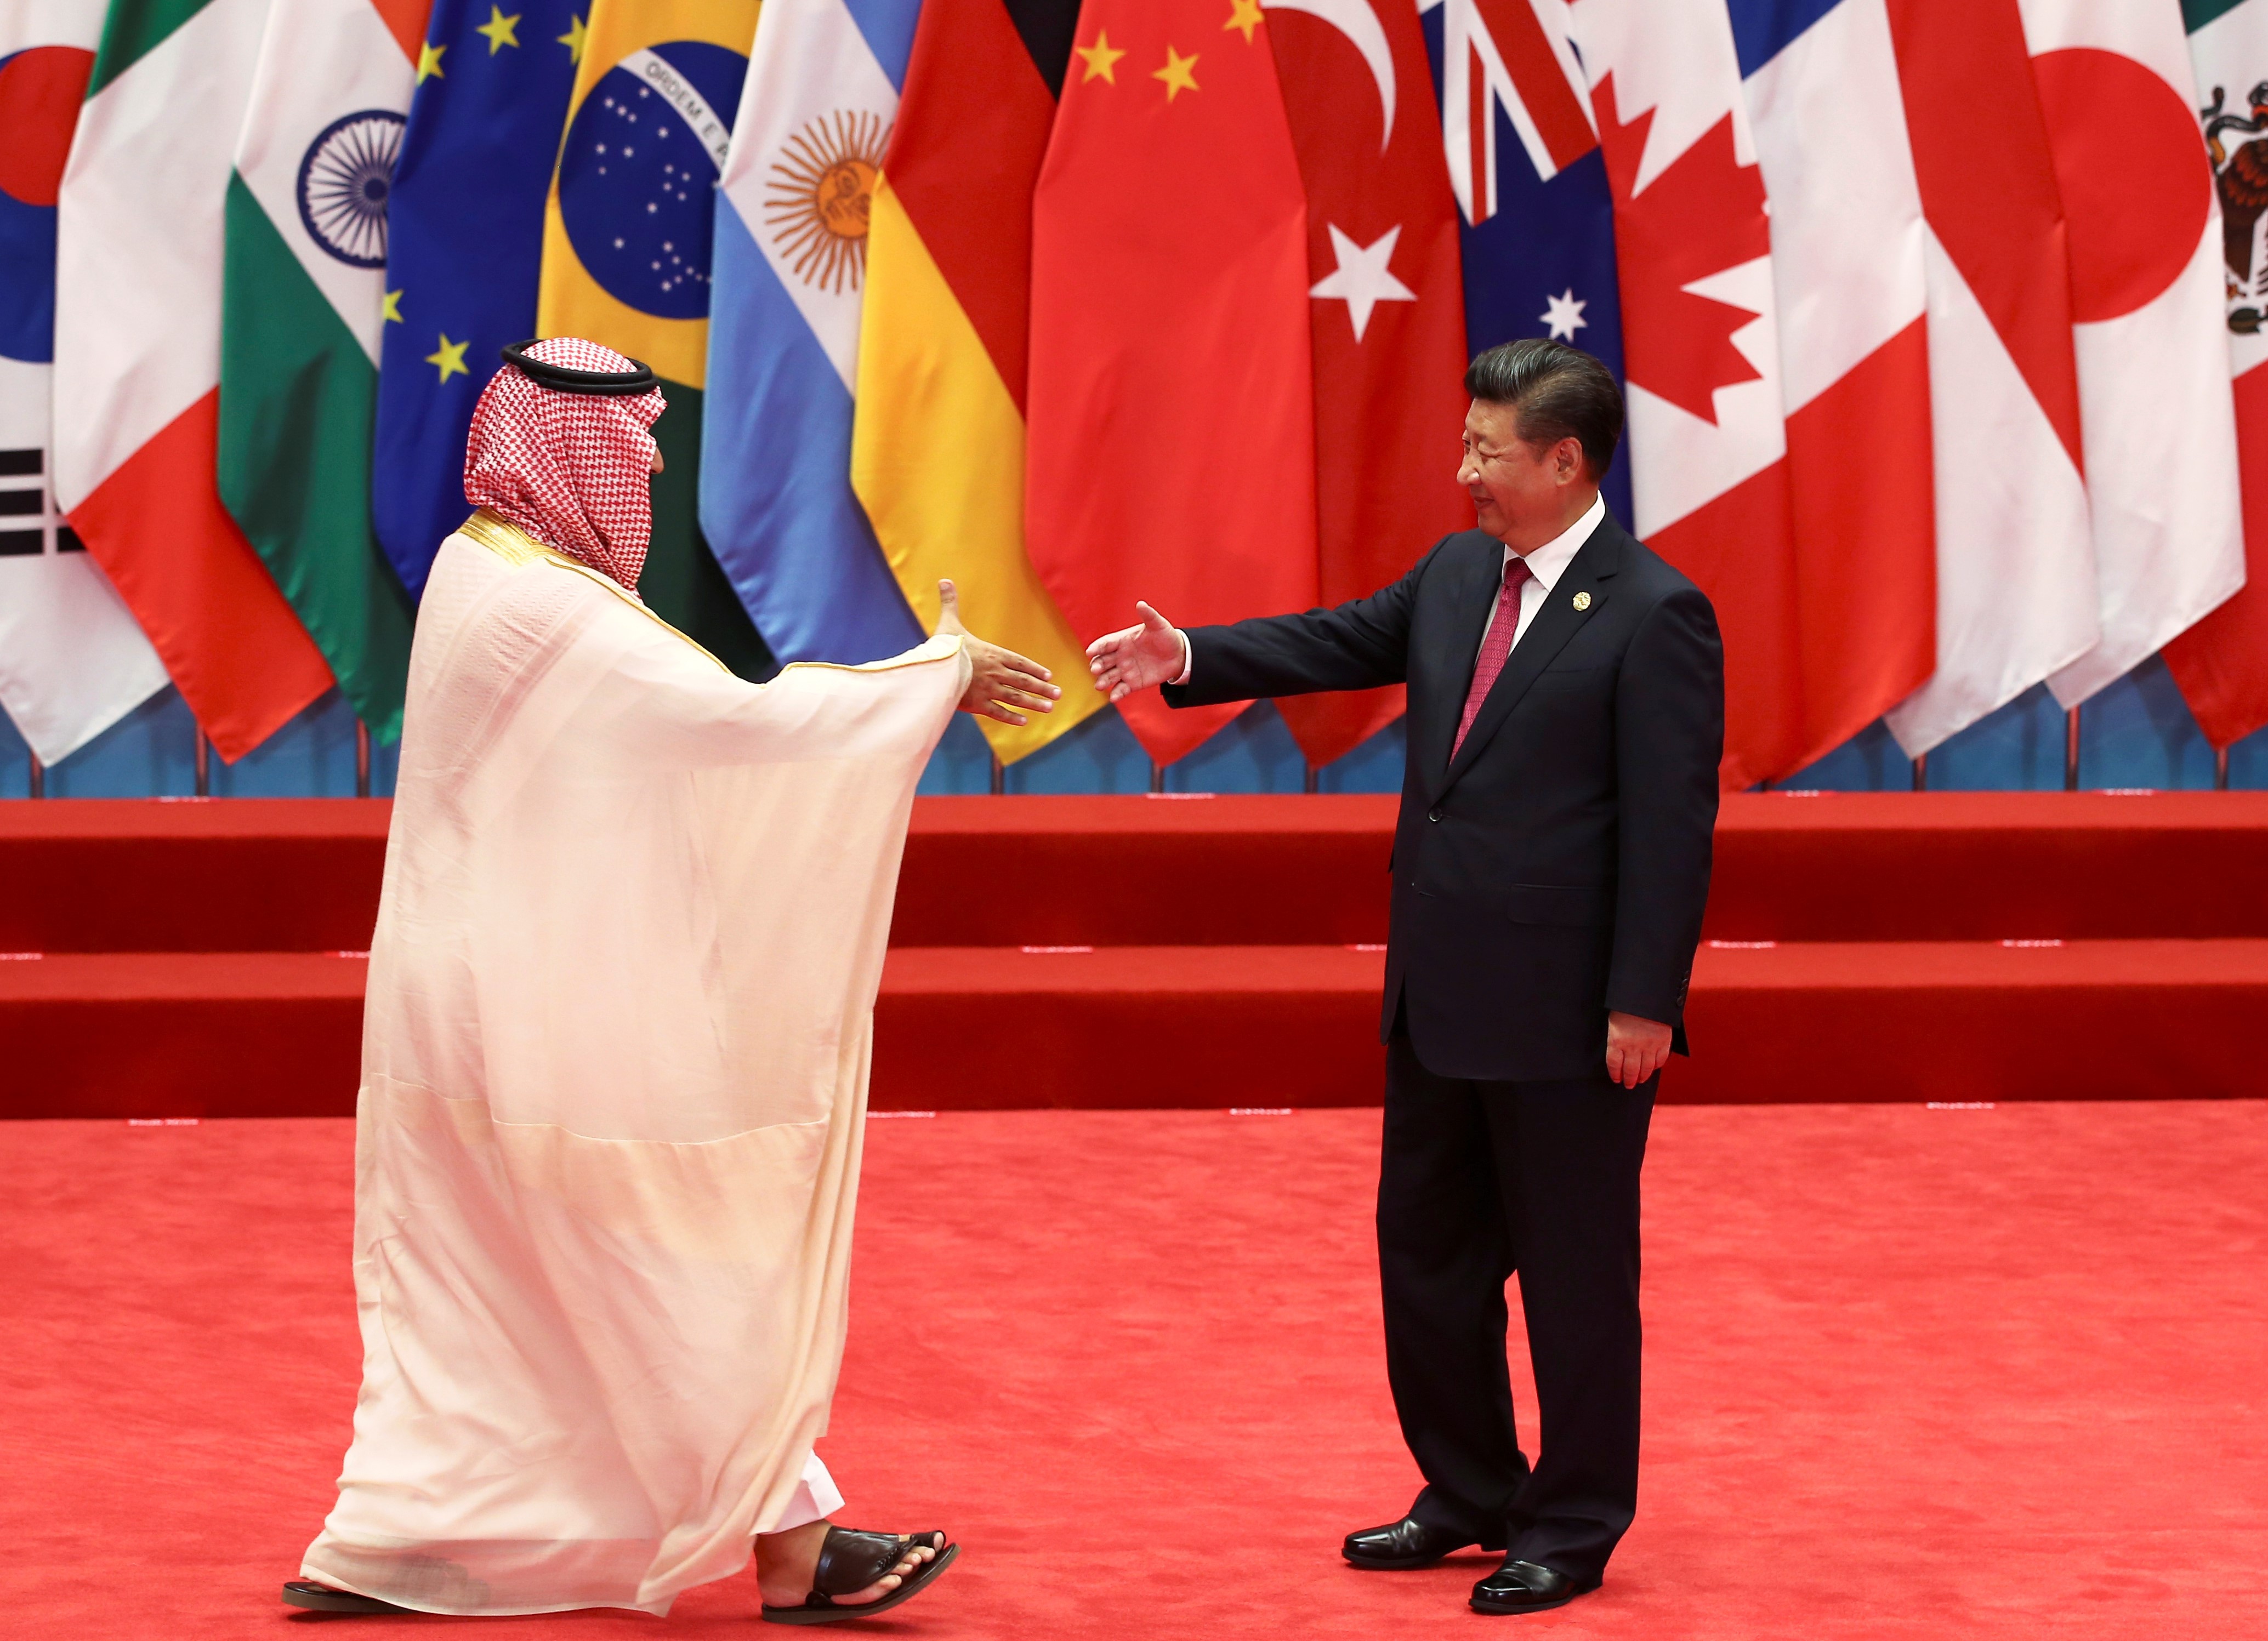 China's President Xi Jinping shakes hands with Crown Prince Mohammed bin Salman during the G20 Summit in Hangzhou, Zhejiang province, China (AFP)